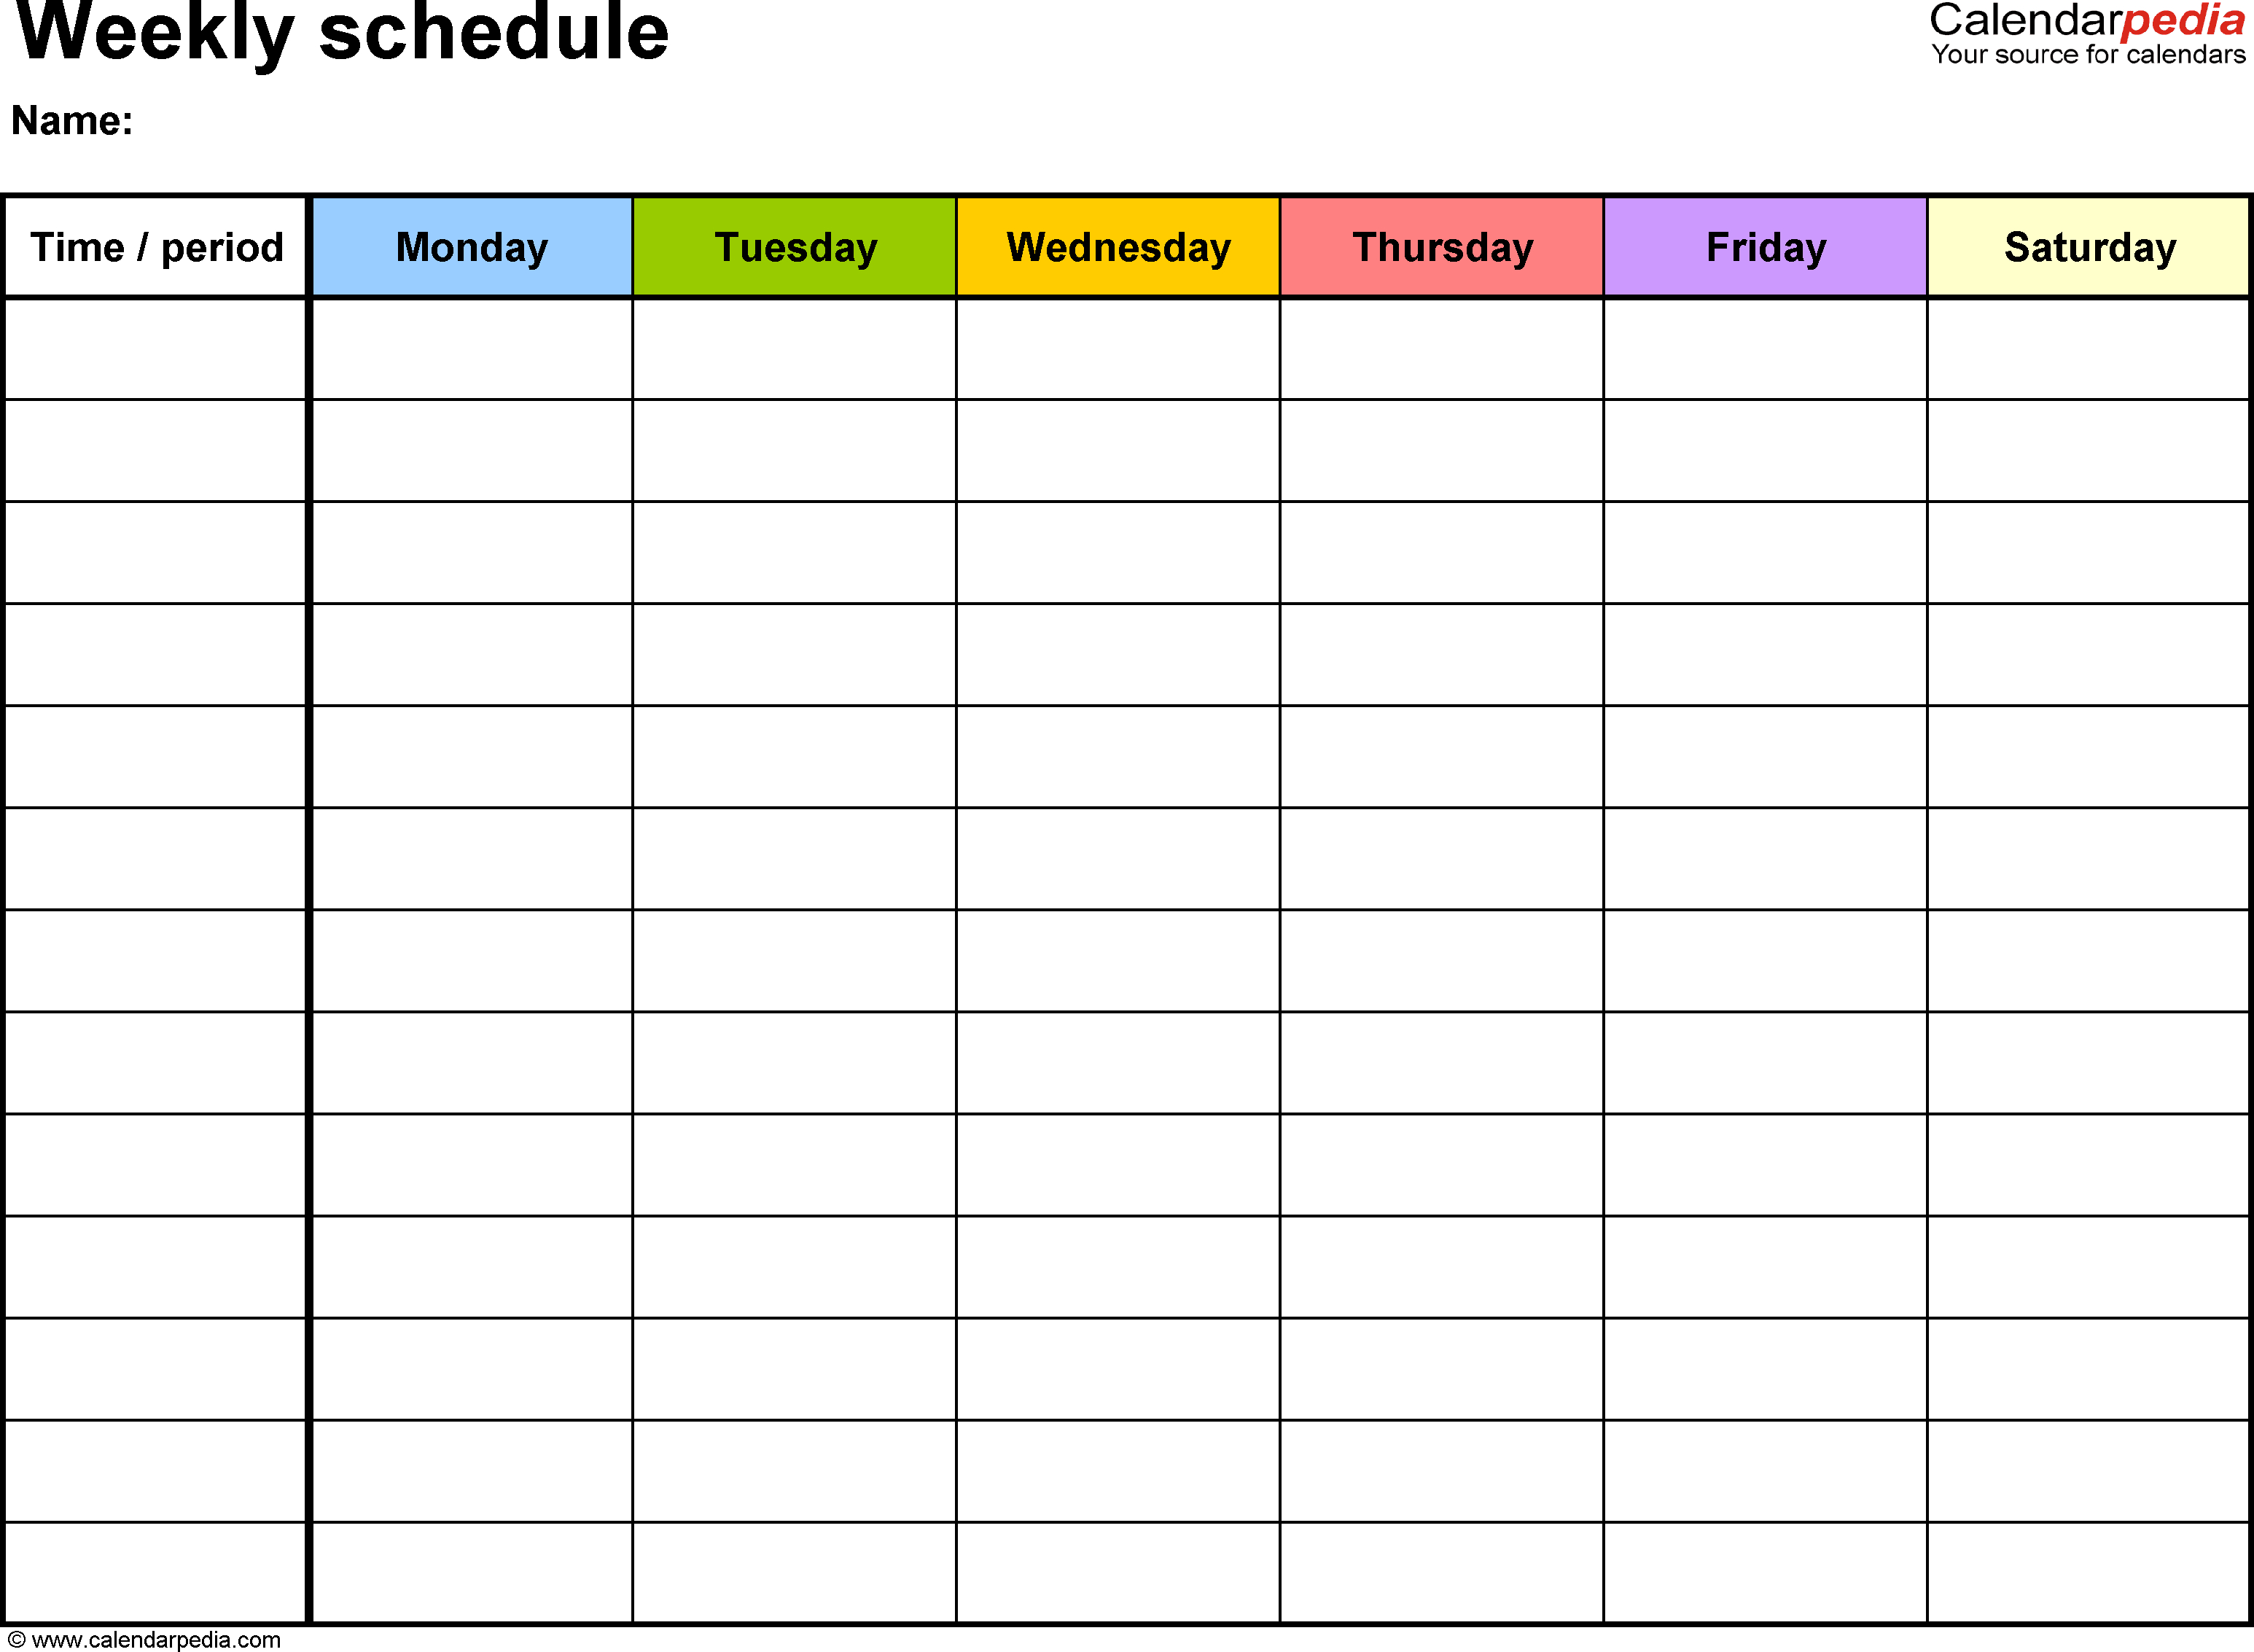 Free Weekly Schedule Templates For Word  18 Templates pertaining to 7 Days A Week Planner